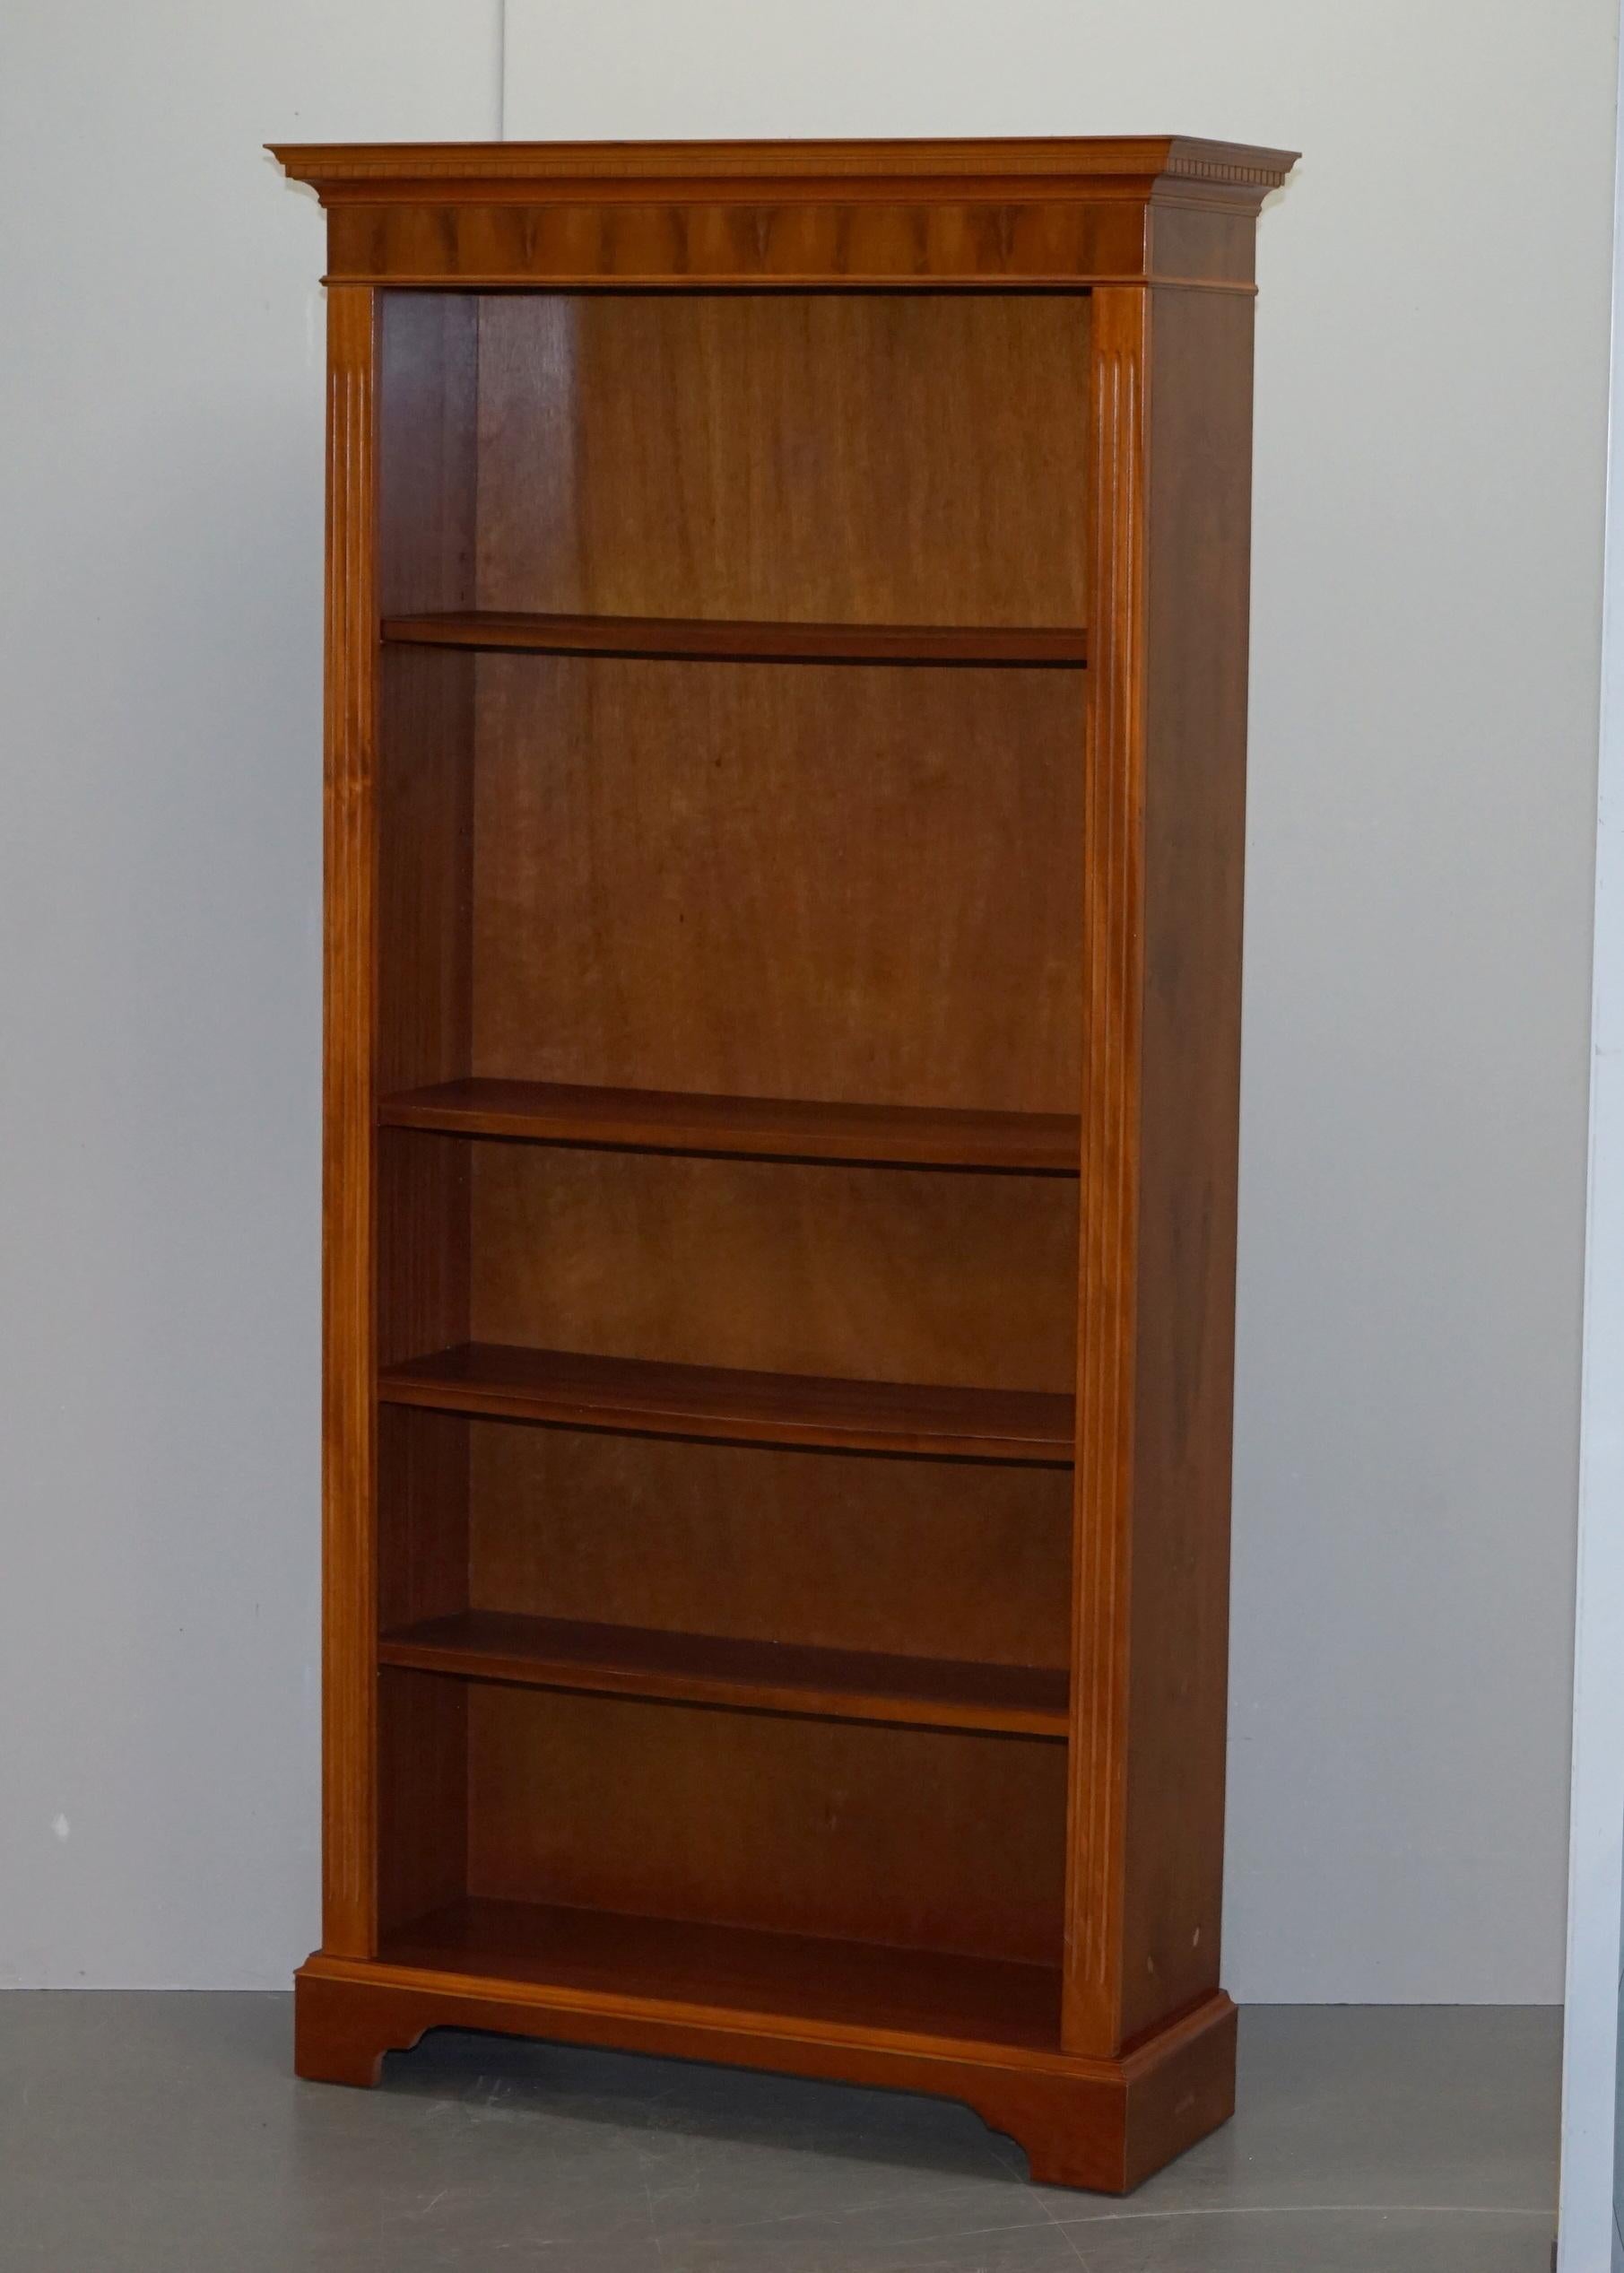 We are delighted to offer for sale this stunning pair of hand made in England Walnut Beresford & Hicks library bookcases with height adjustable shelves

A good looking well made pair, ideally suited for any setting really, at home library or